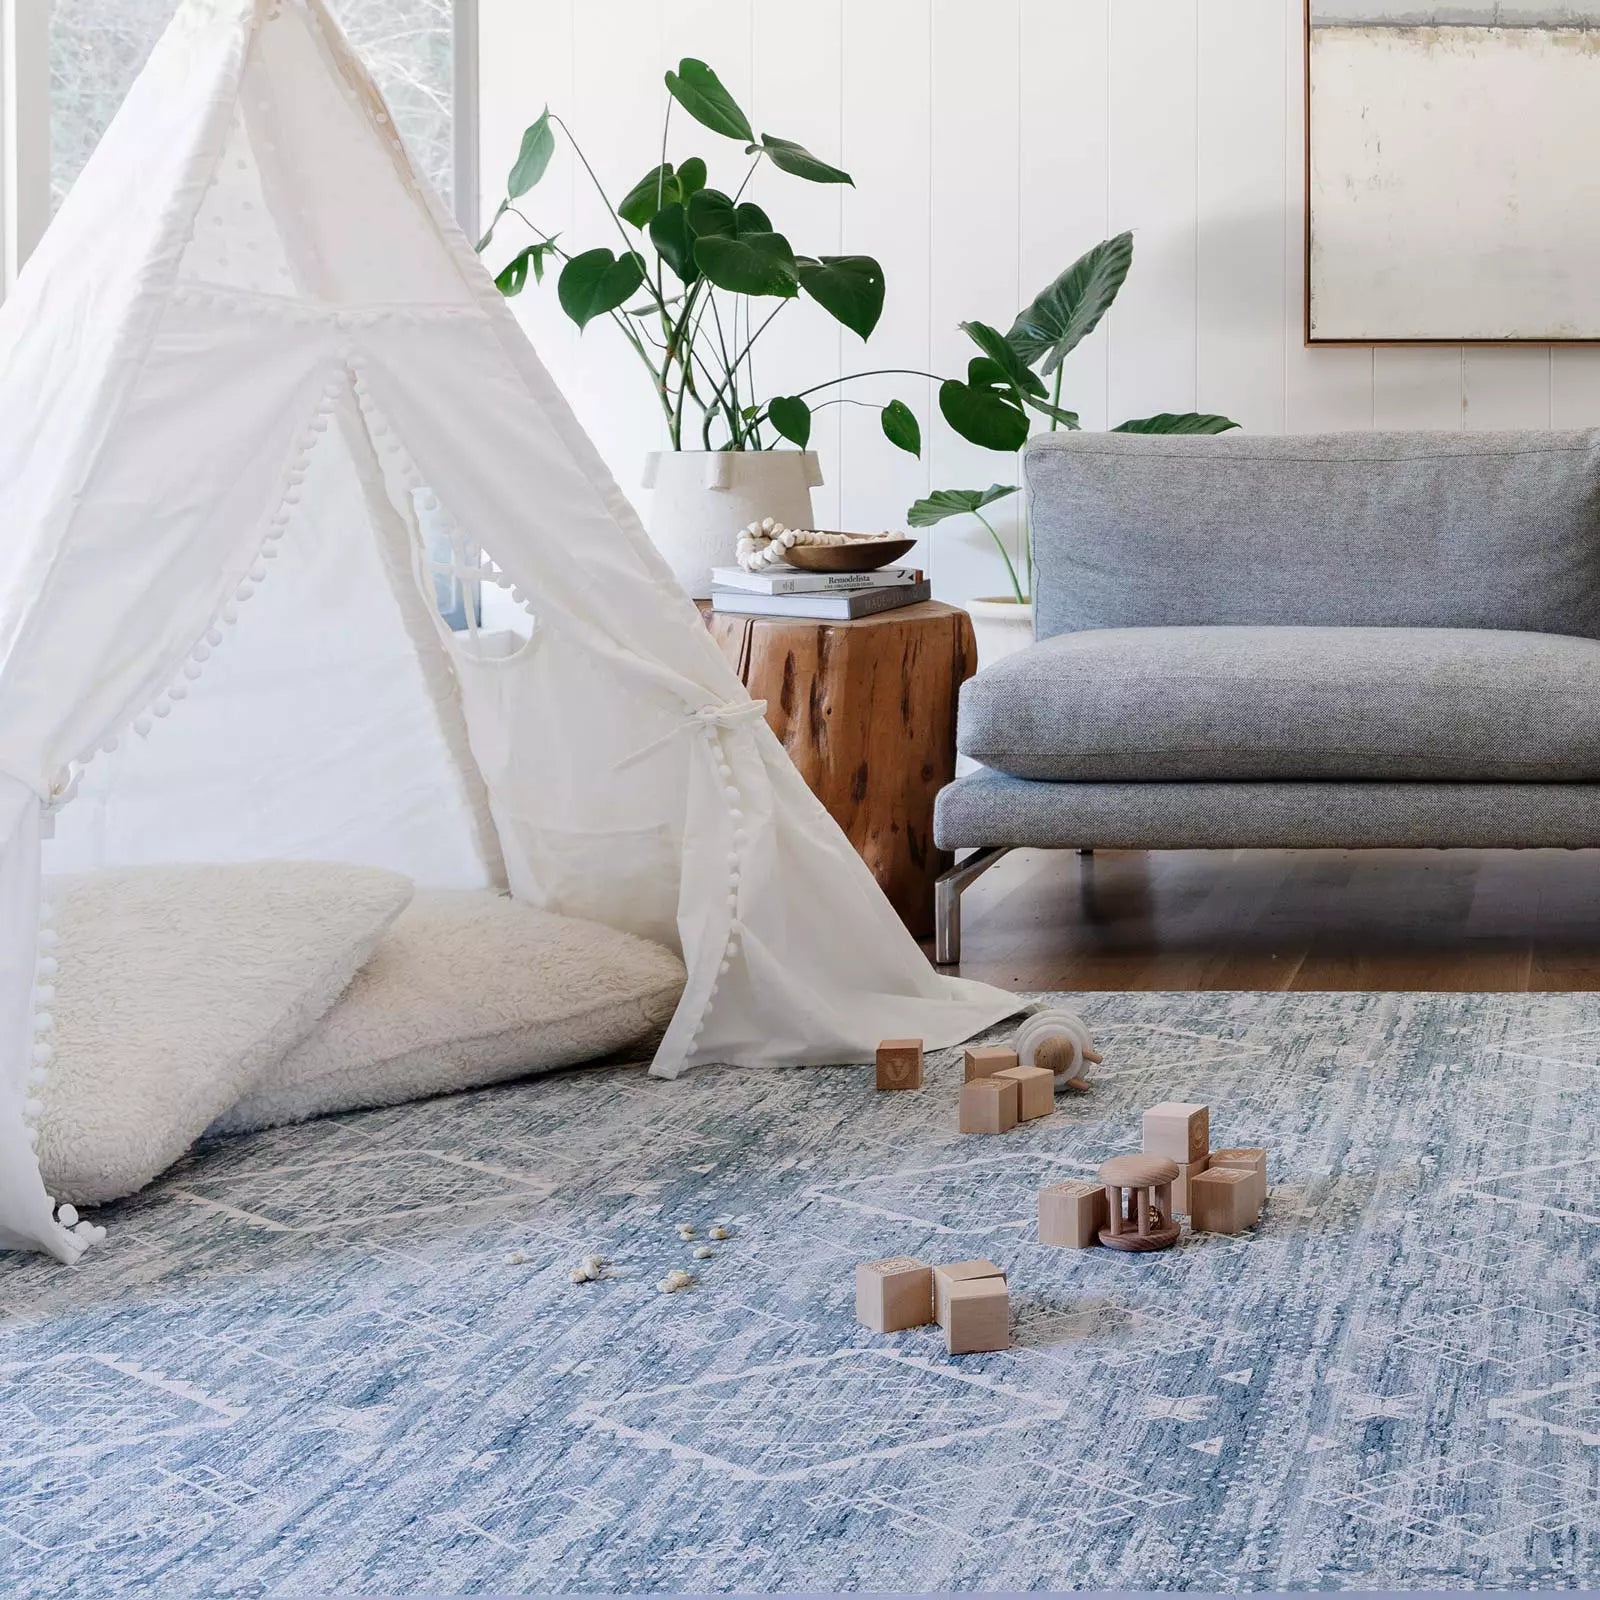 Indigo Blue Minimal Boho Pattern play mat shown in living room with tipi